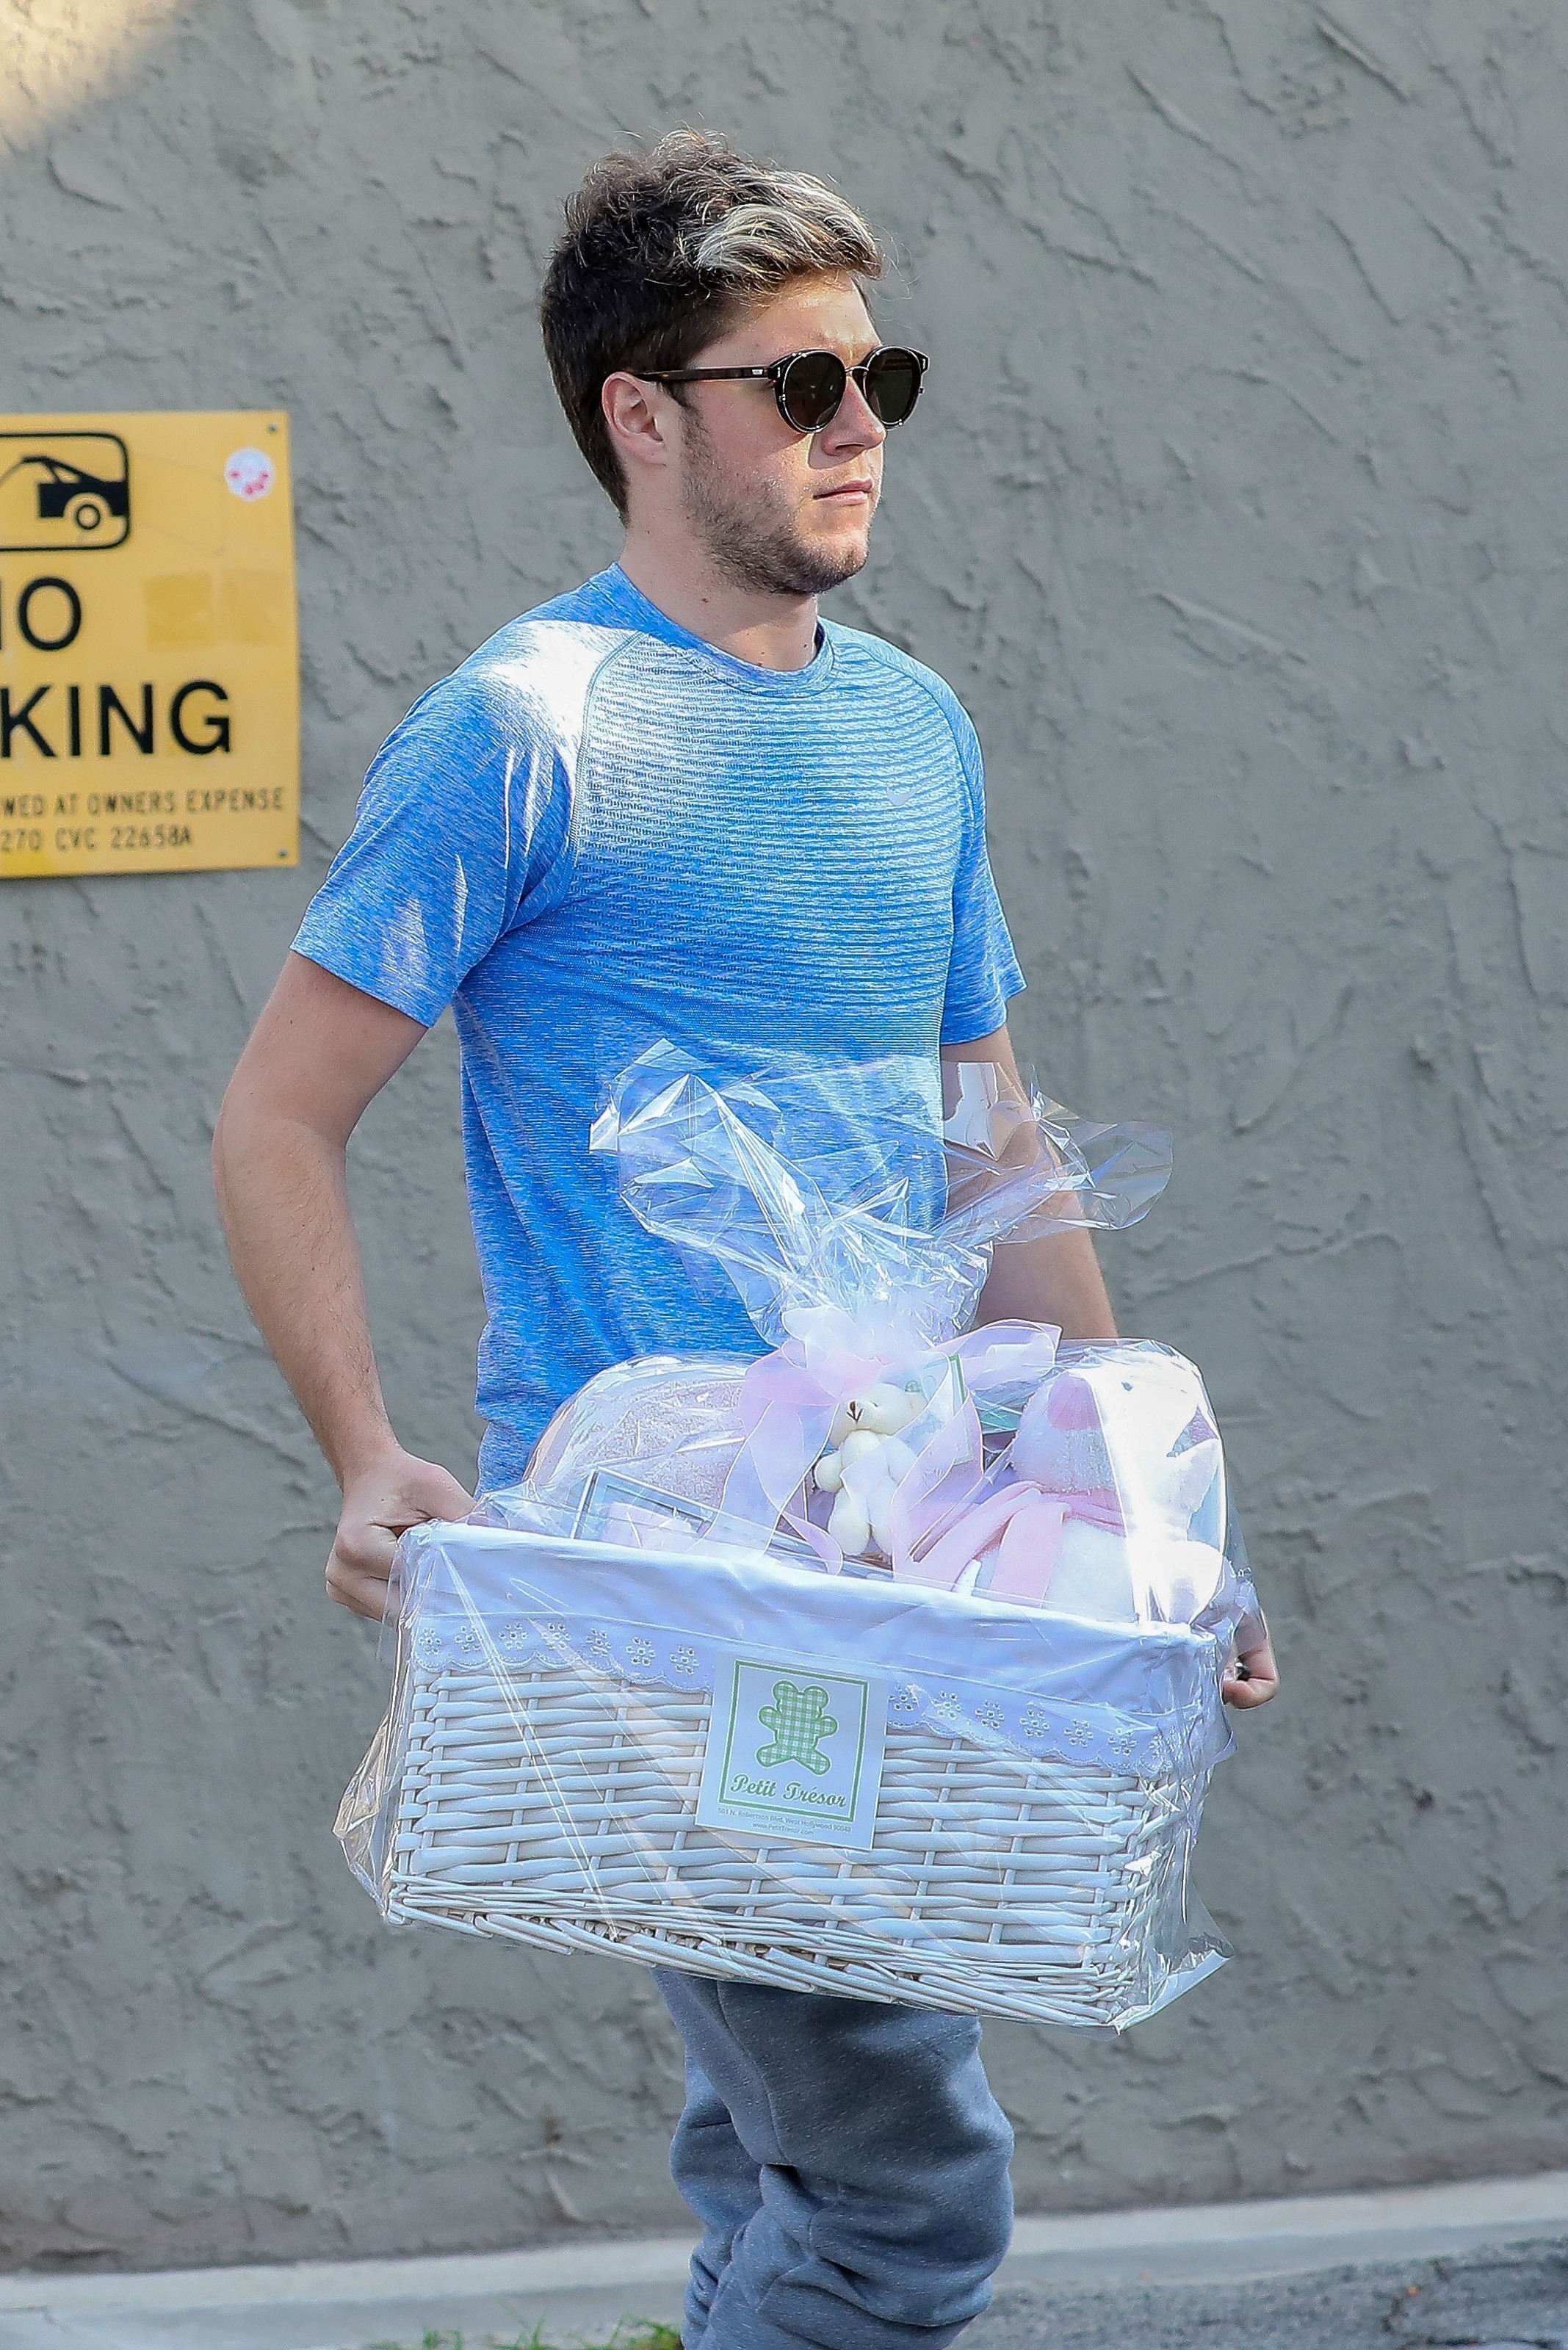 *EXCLUSIVO* - Niall Horan buys a basket full of goodies at Petit Tresor in West Hollywood. The One Direction singer rocked sweat pants and sneakers for his time on the town. AKM-GSI 7 DEZEMBRO 2016Carolina Fernandes (11)3280-9759 carol@akmgsi.com.br